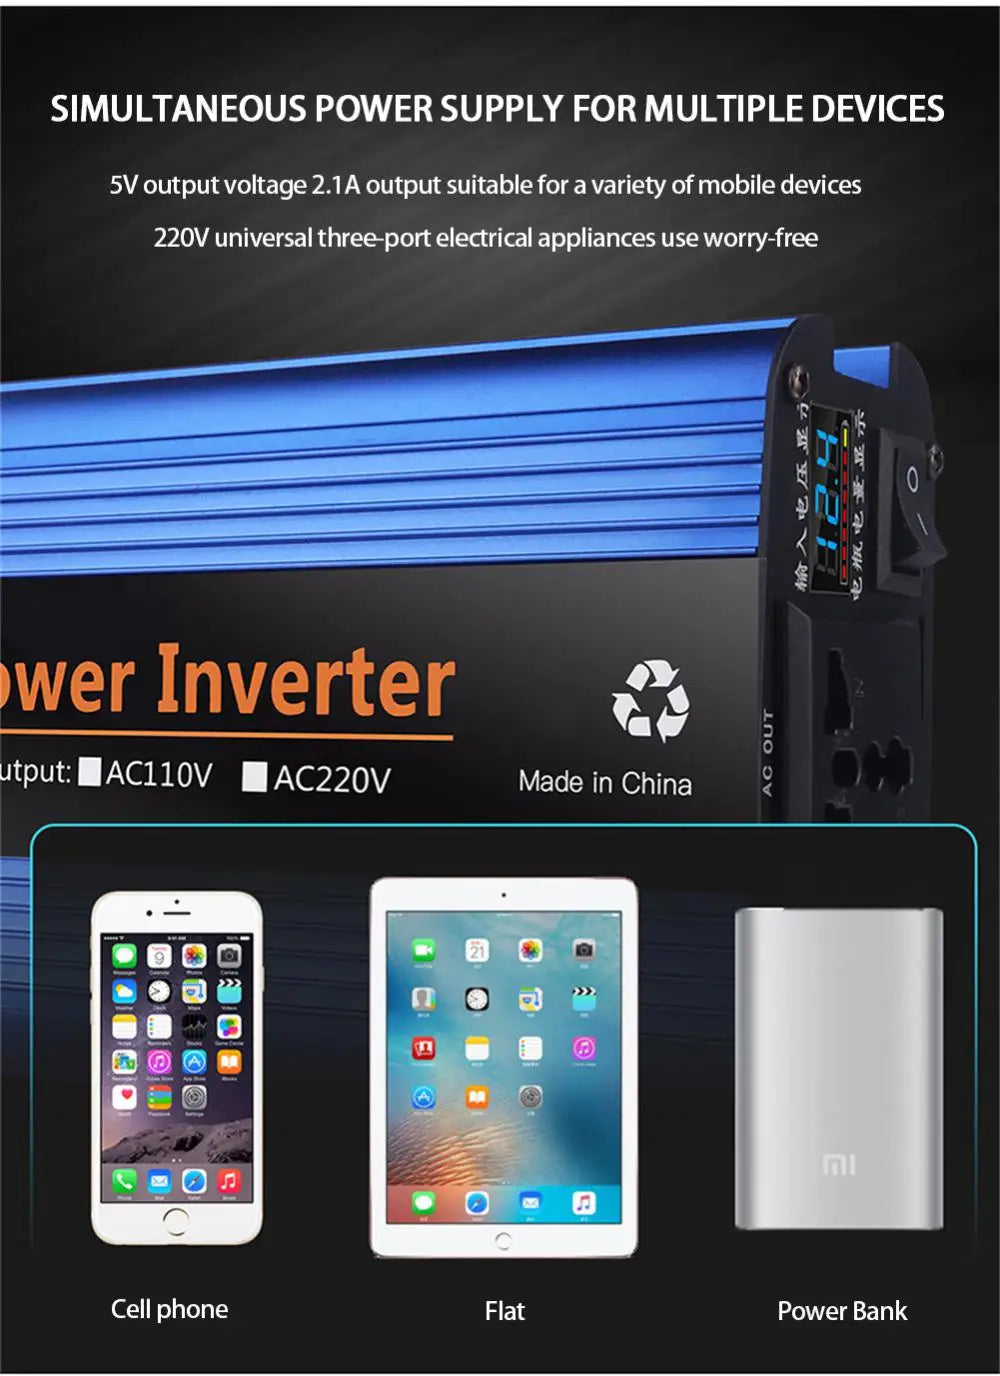 4000w/6000w Pure Sine Inverter, Simultaneous power supply for multiple devices with 2.1A output, suitable for charging mobile devices and small appliances.